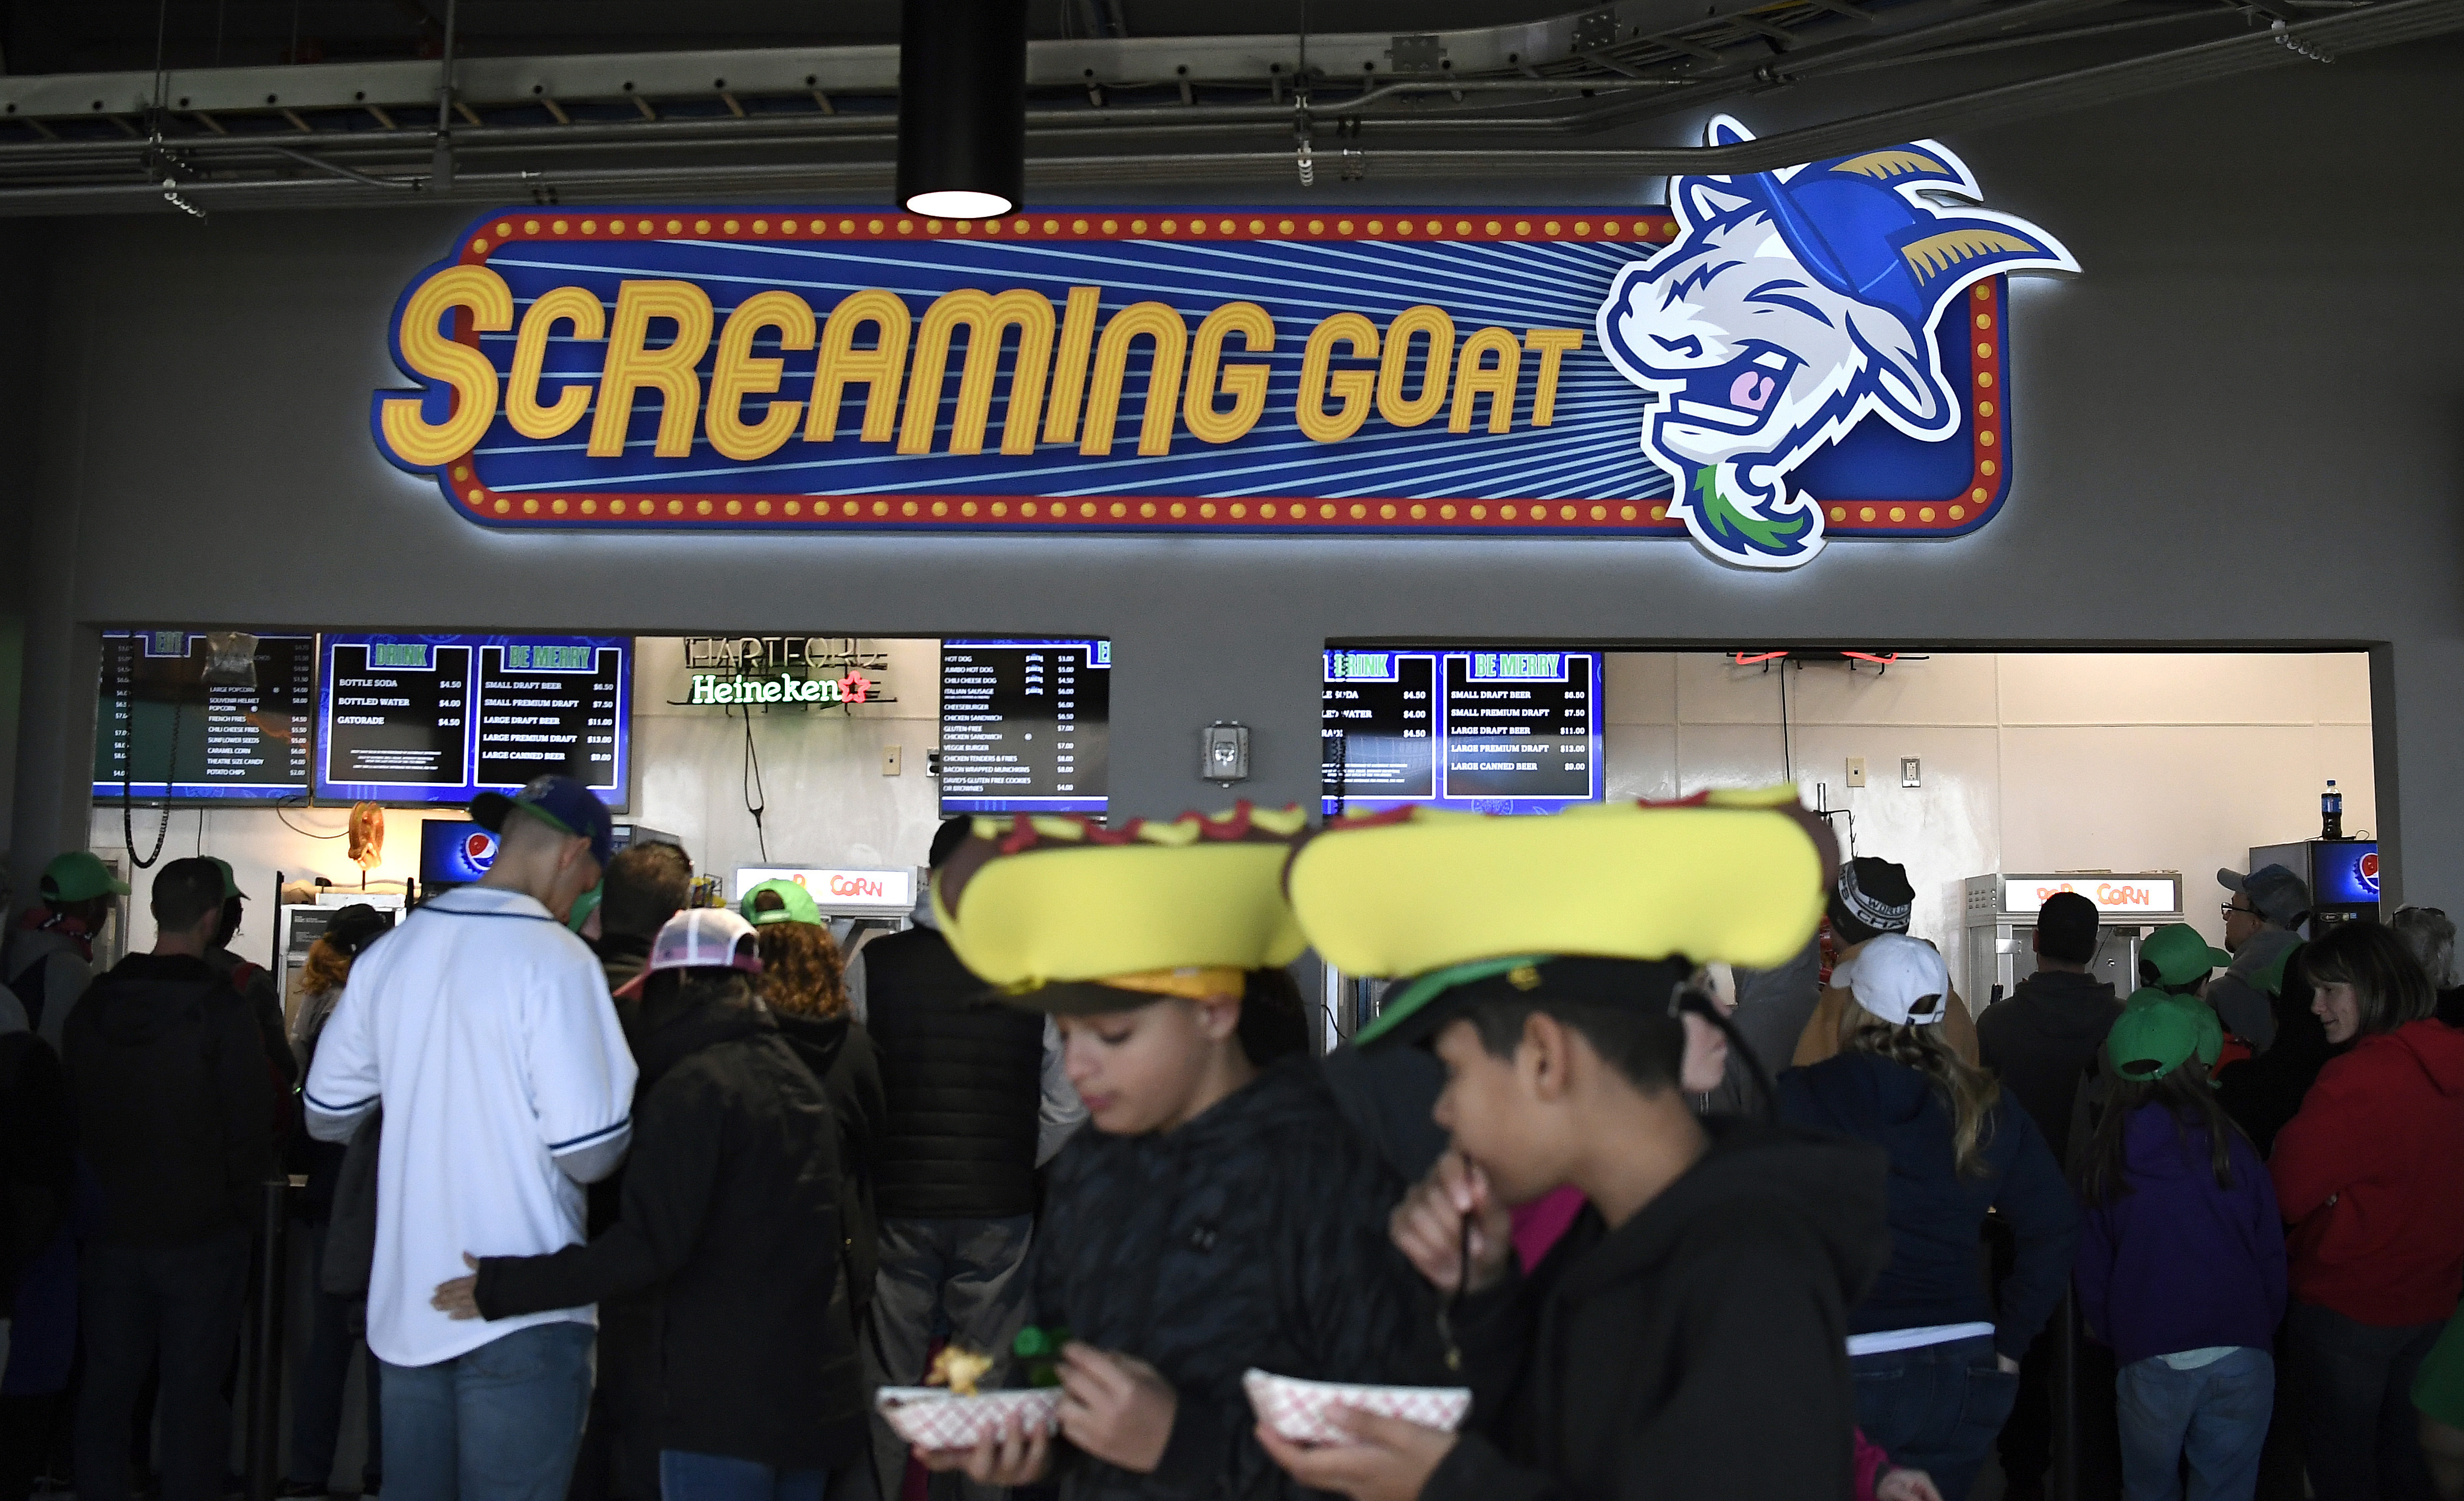 Yard Goats Announce Promotional Schedule At Party For Sponsors, Season  Ticket Holders